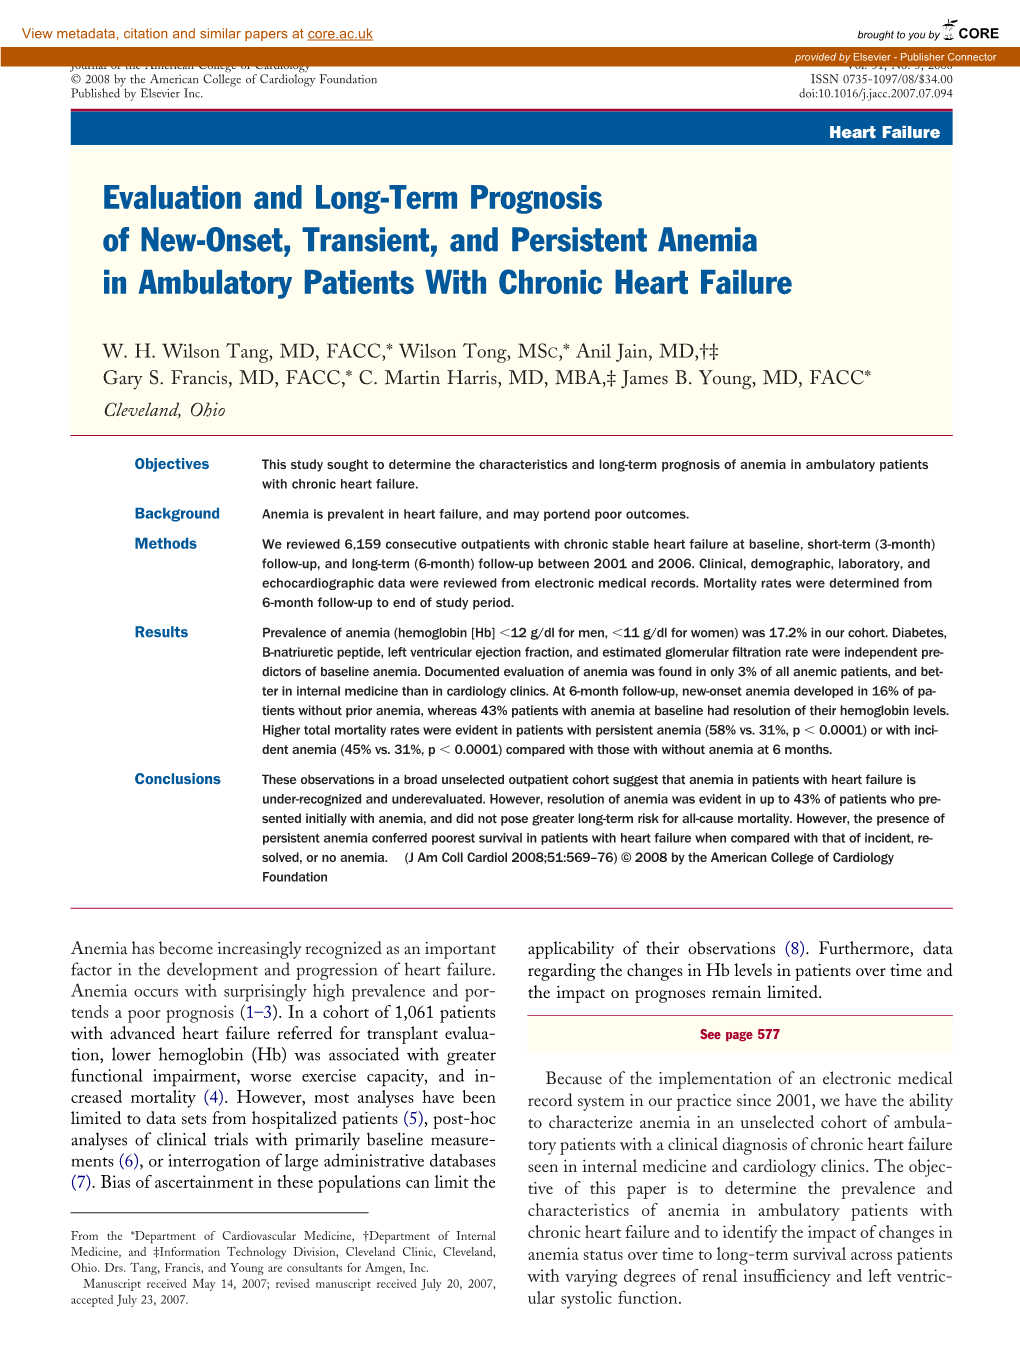 Evaluation and Long-Term Prognosis of New-Onset, Transient, and Persistent Anemia in Ambulatory Patients with Chronic Heart Failure